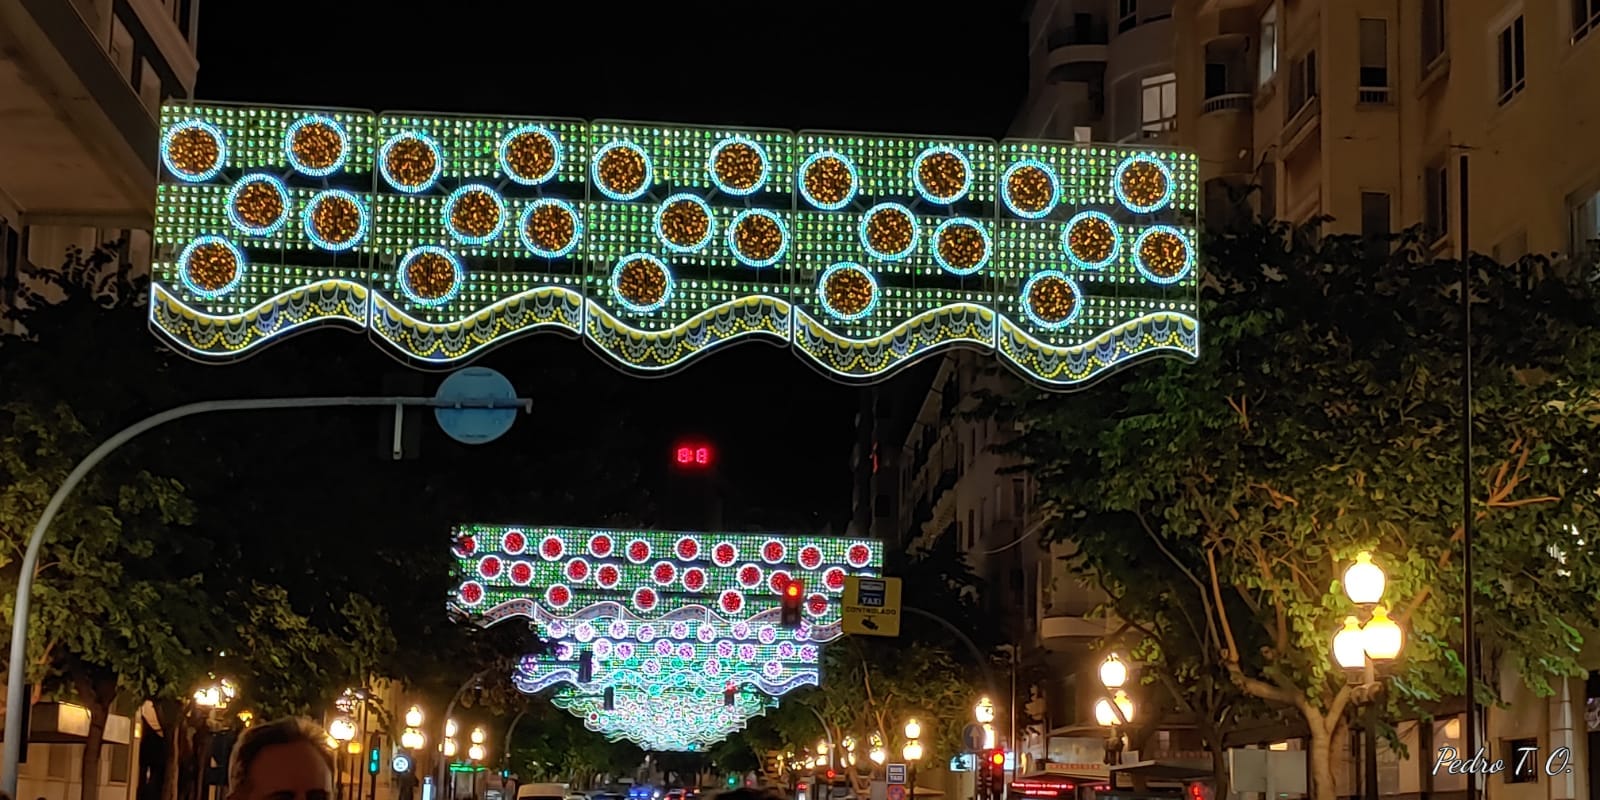 Plans For Christmas Light Cut Backs To Save Energy Opposed By Alicante In Spain